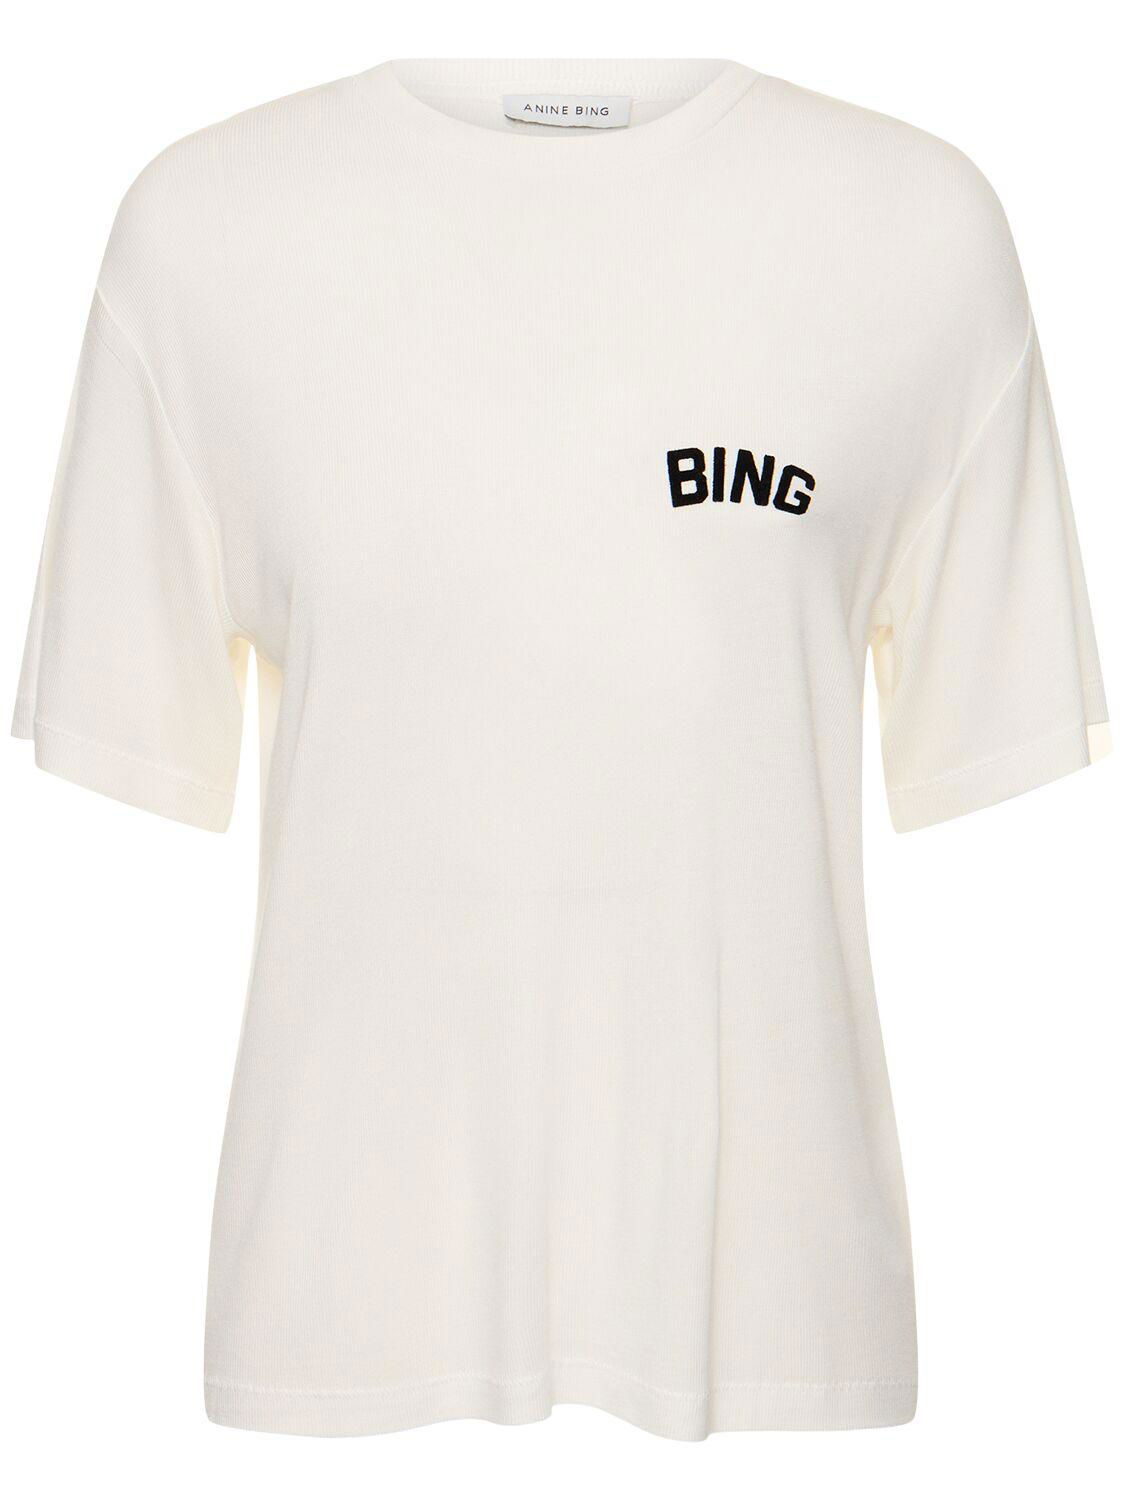 Louis Hollywood Viscose T-shirt by ANINE BING